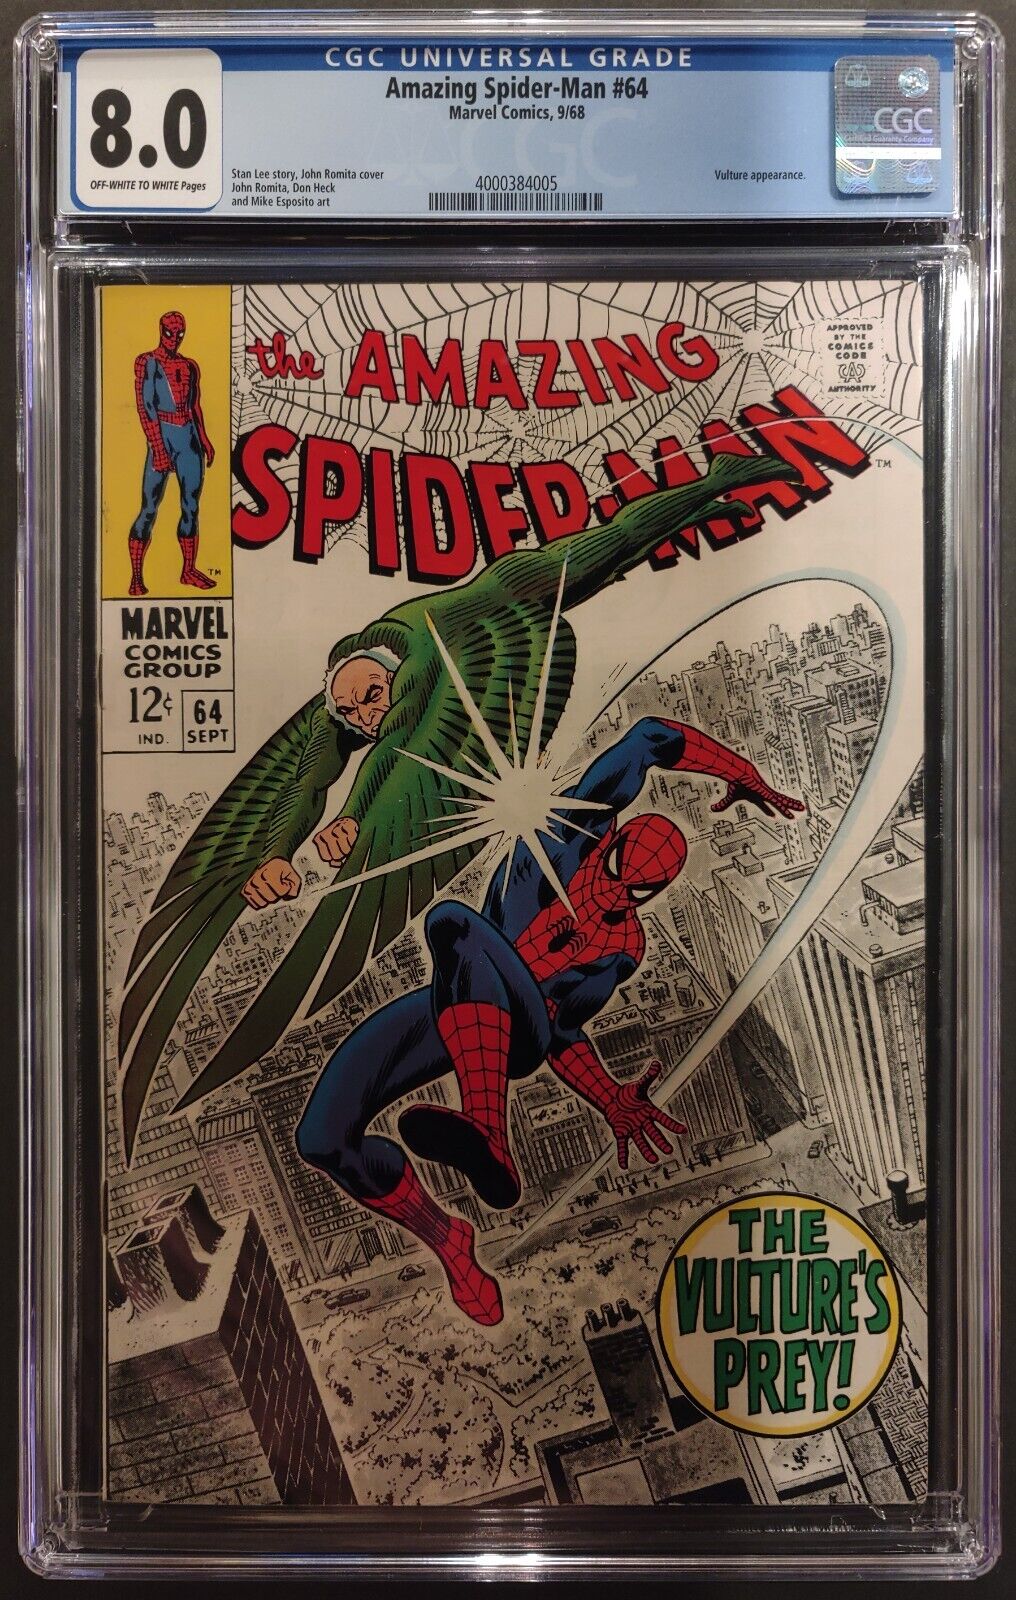 AMAZING SPIDER-MAN #64 CGC 8.0 OW-W MARVEL COMICS SEPT 1968 - VULTURE APPEARANCE